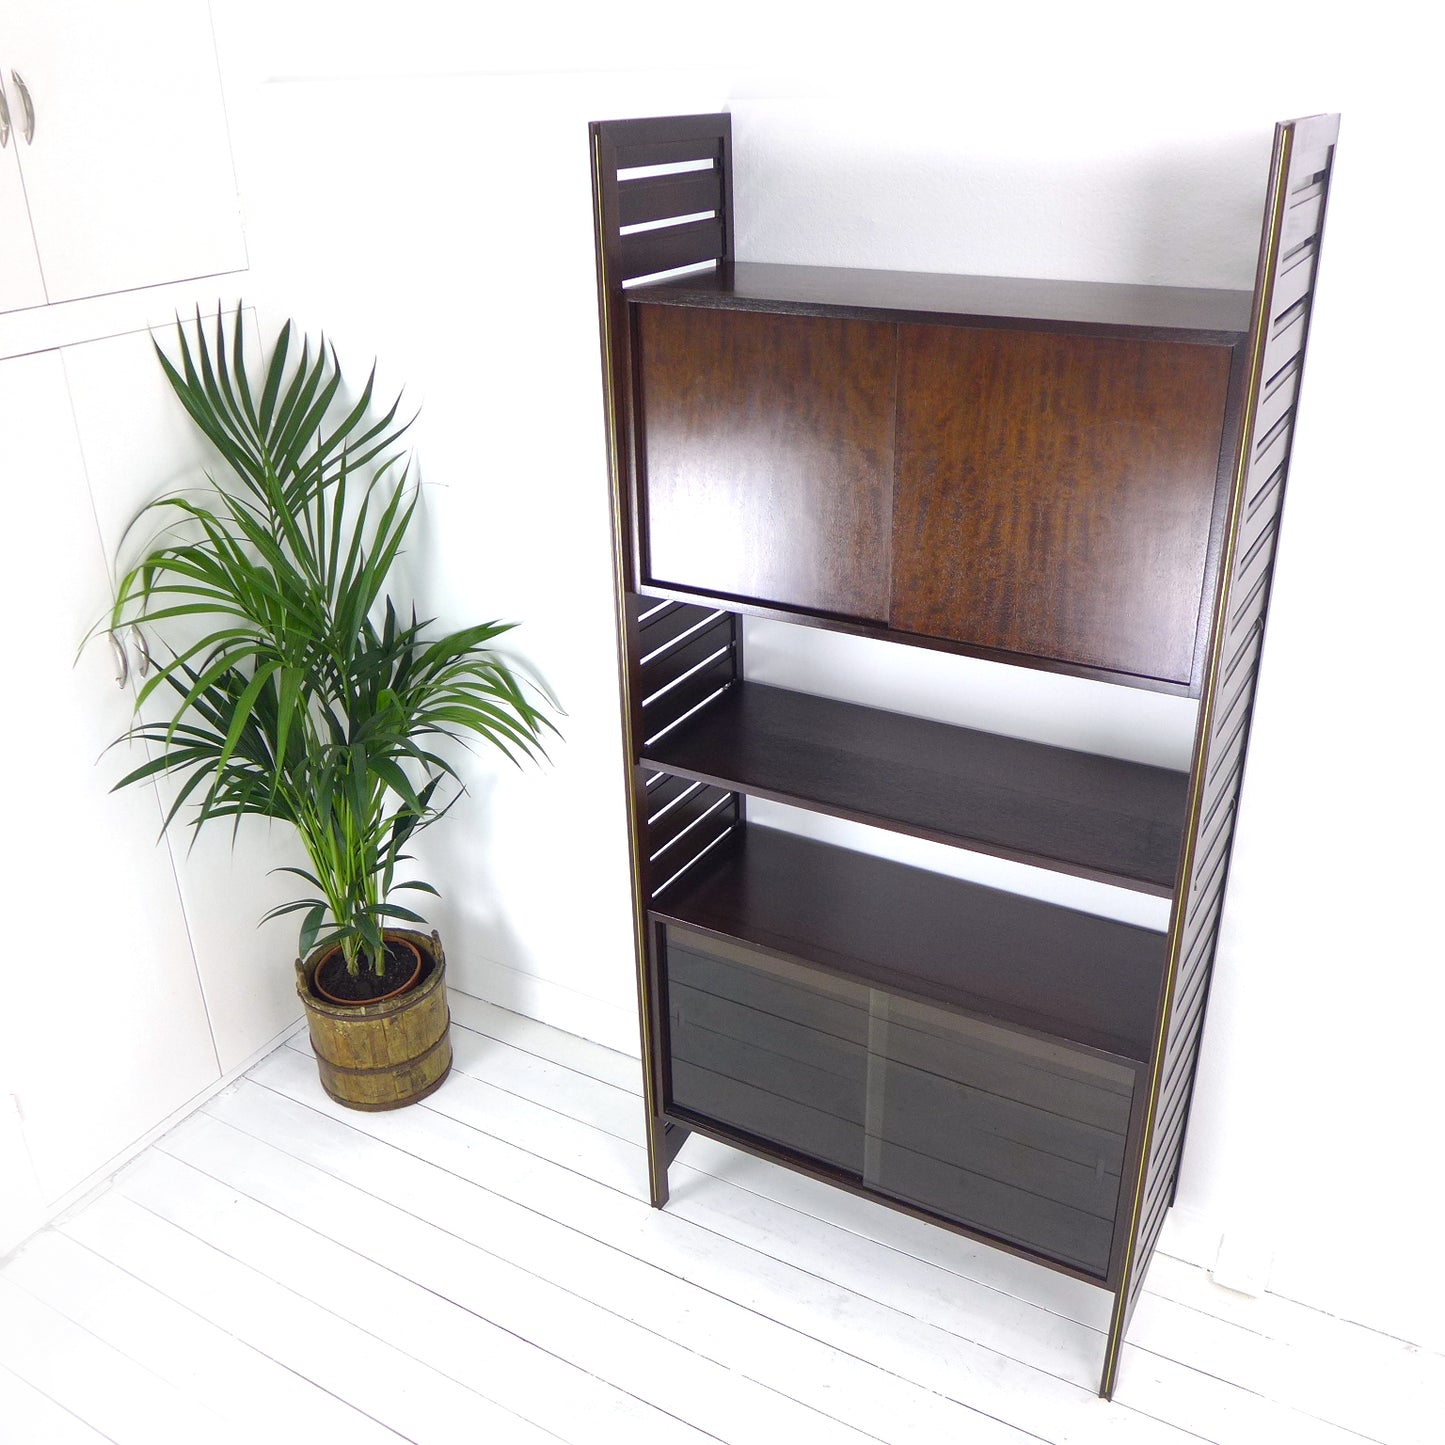 Ladderax Shelving Unit with Drinks/Record Cabinet